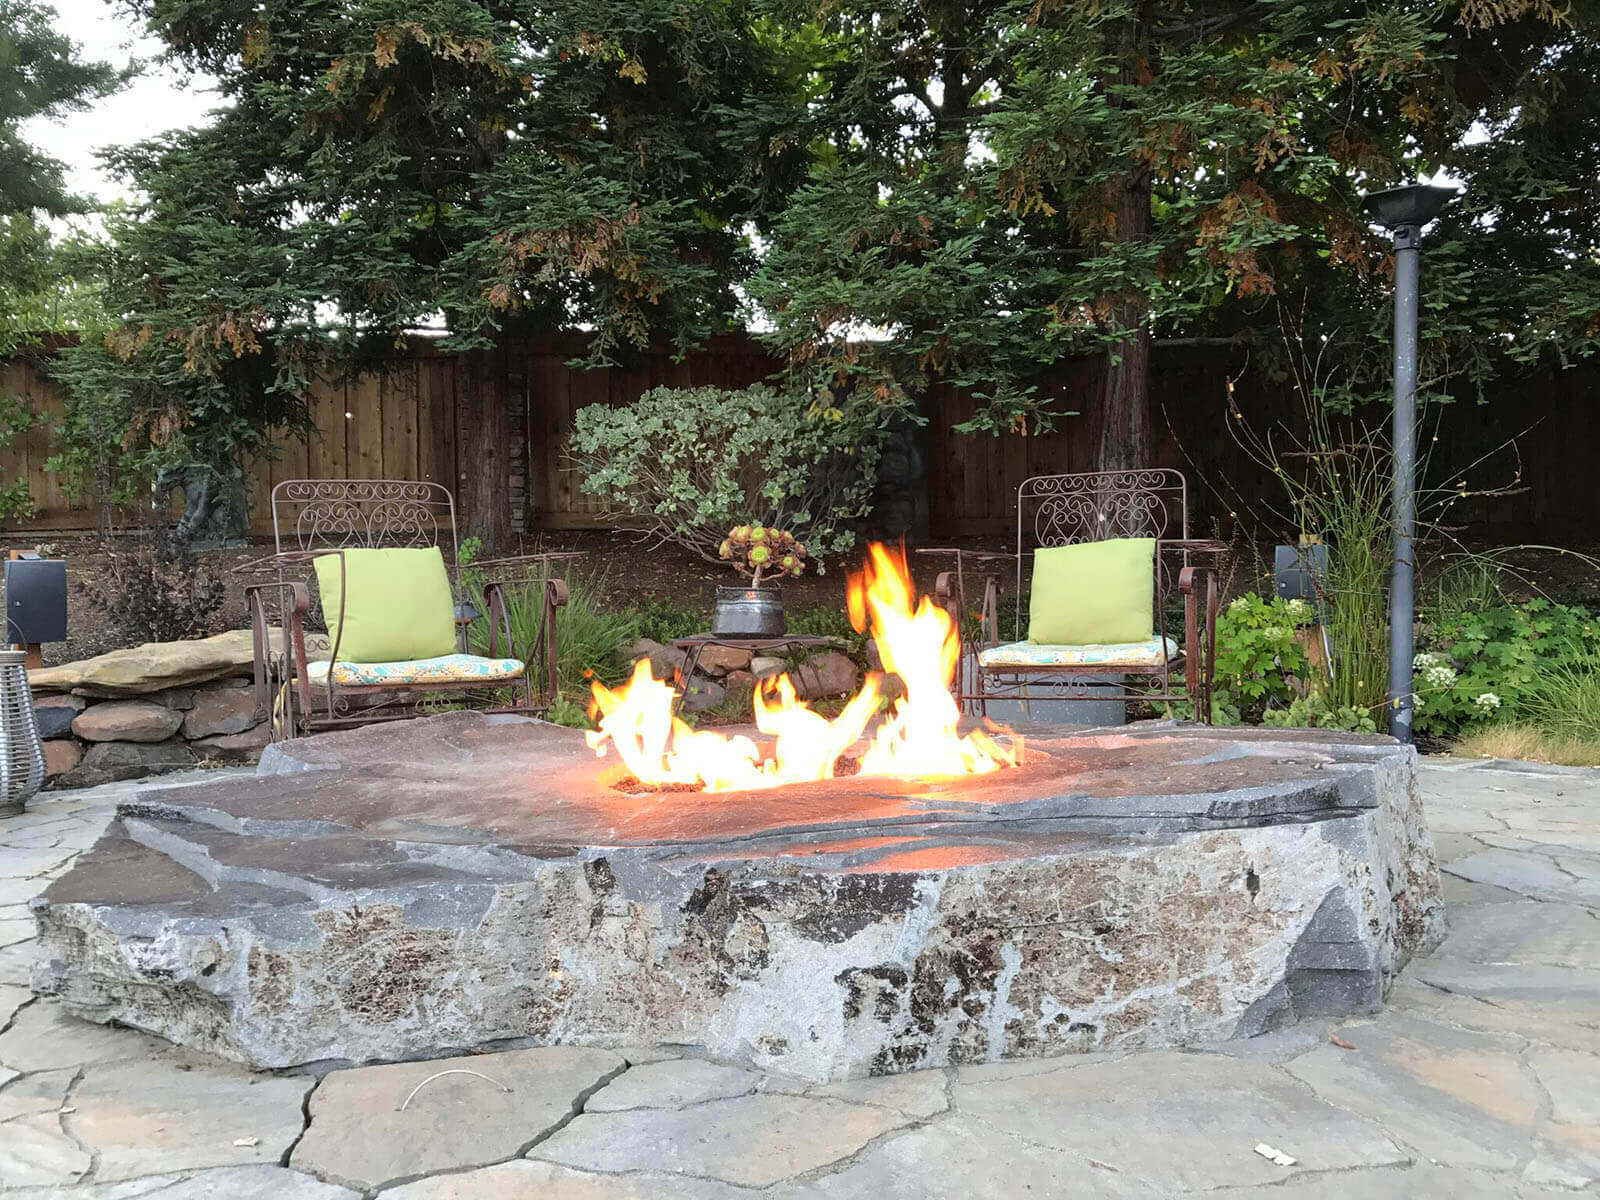 Stone slab fire pit in casual outdoor living area with wrought-iron chairs and landscaped garden